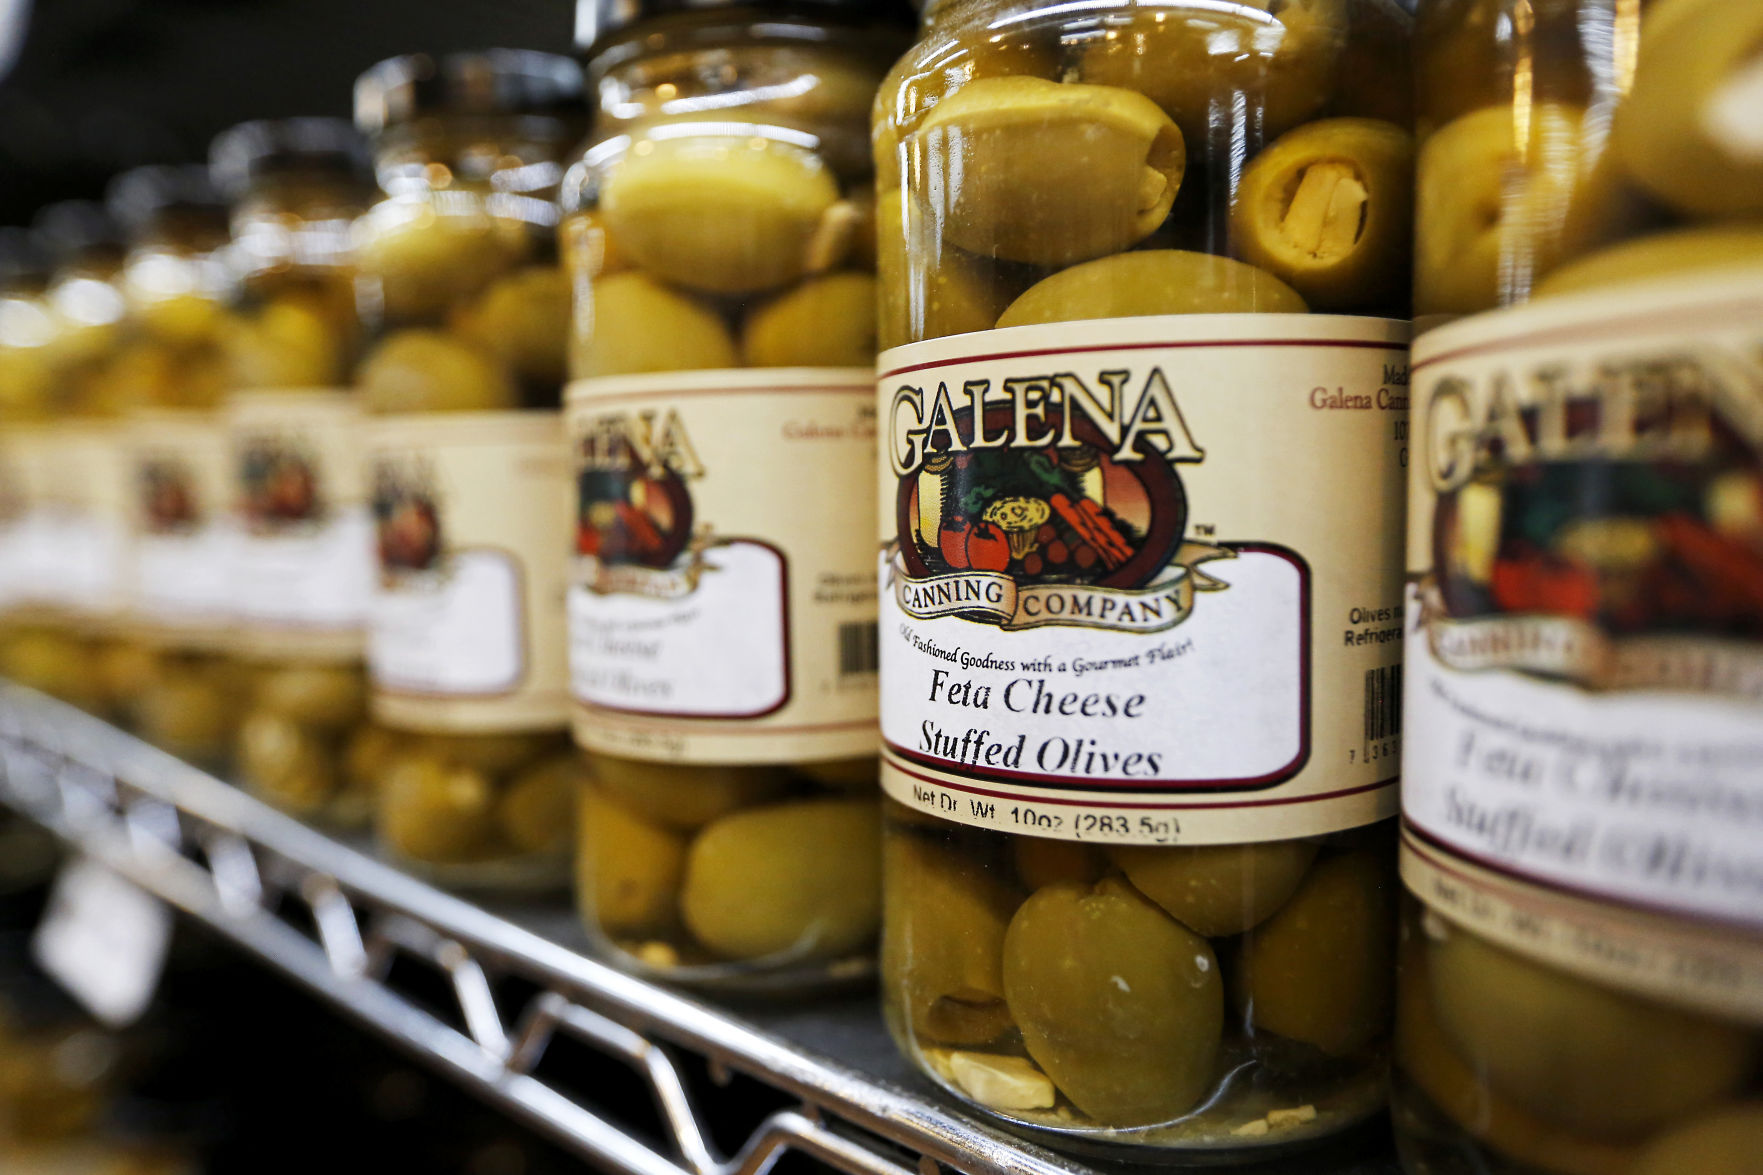 Stuffed olives at Galena Canning Company in Galena, Ill.    PHOTO CREDIT: EILEEN MESLAR